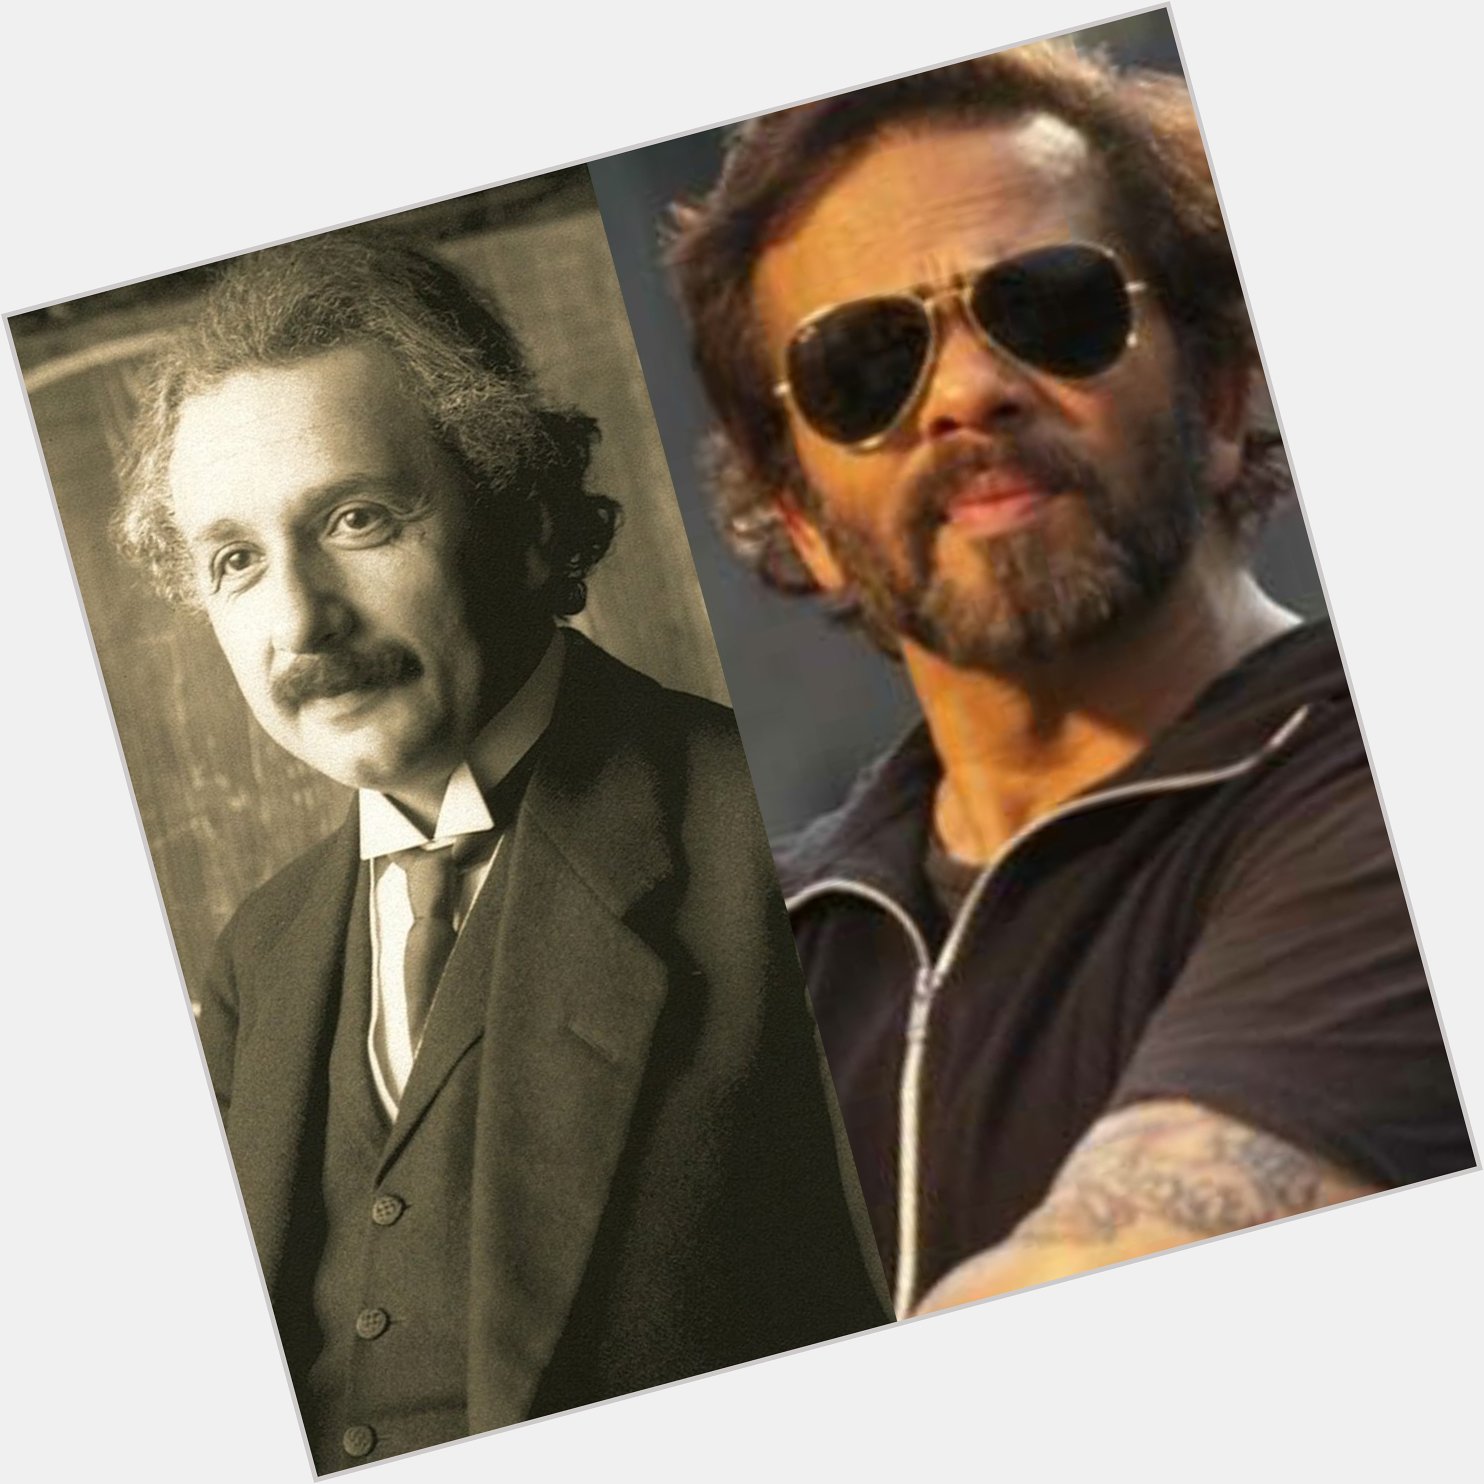 Happy Birthday Albert Einstein & Rohit Shetty

The persons who defined/redefined Physics...! 